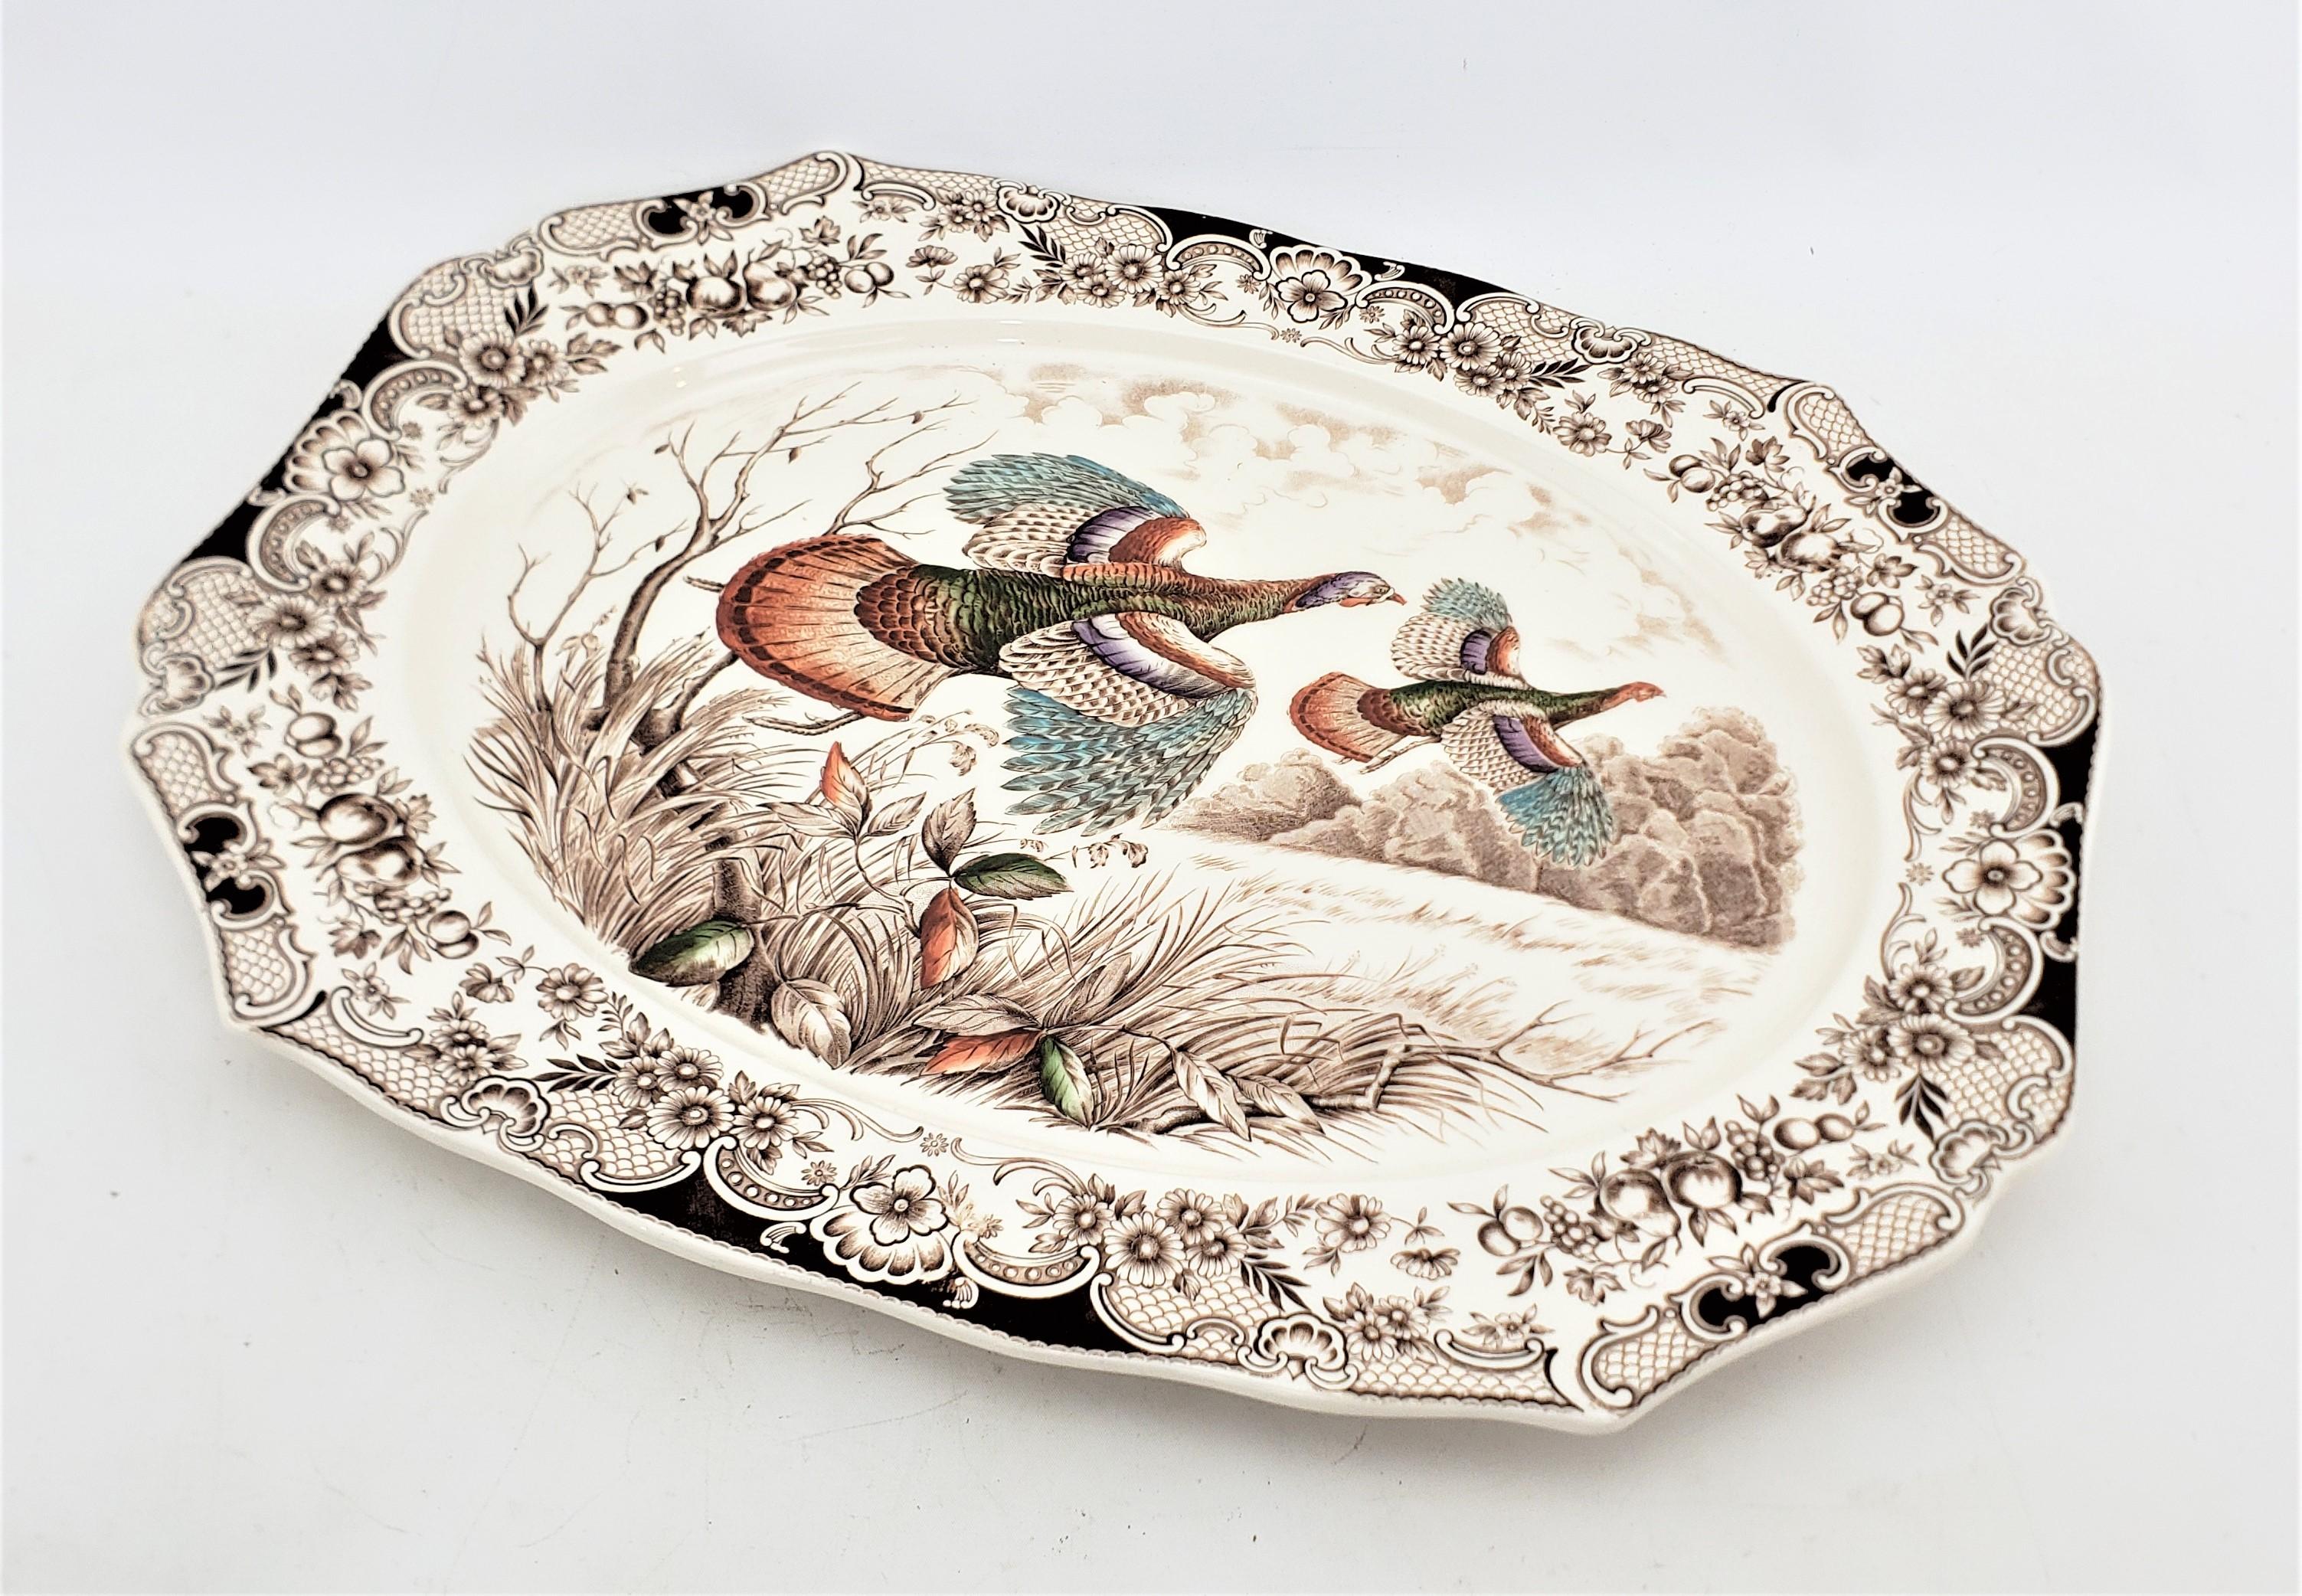 This extremely large serving platter was made by the well known Johnson Brothers of England in approximately 1900 in a period Victorian style. The platter is ceramic and comes from their Windsor Ware line, with a cream ground and decorated with a